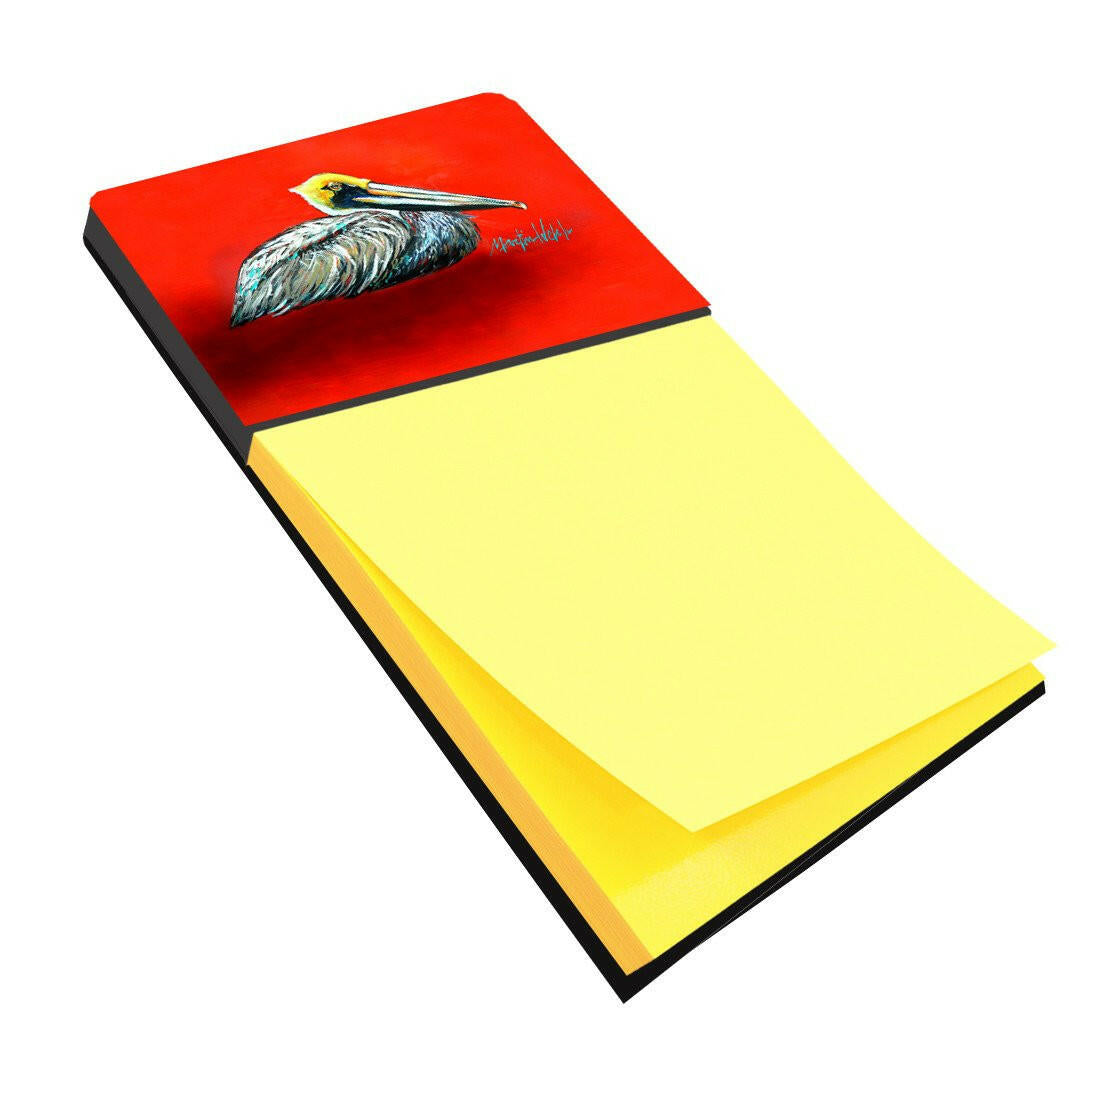 Sitting Brown Pelican Sticky Note Holder MW1232SN by Caroline's Treasures